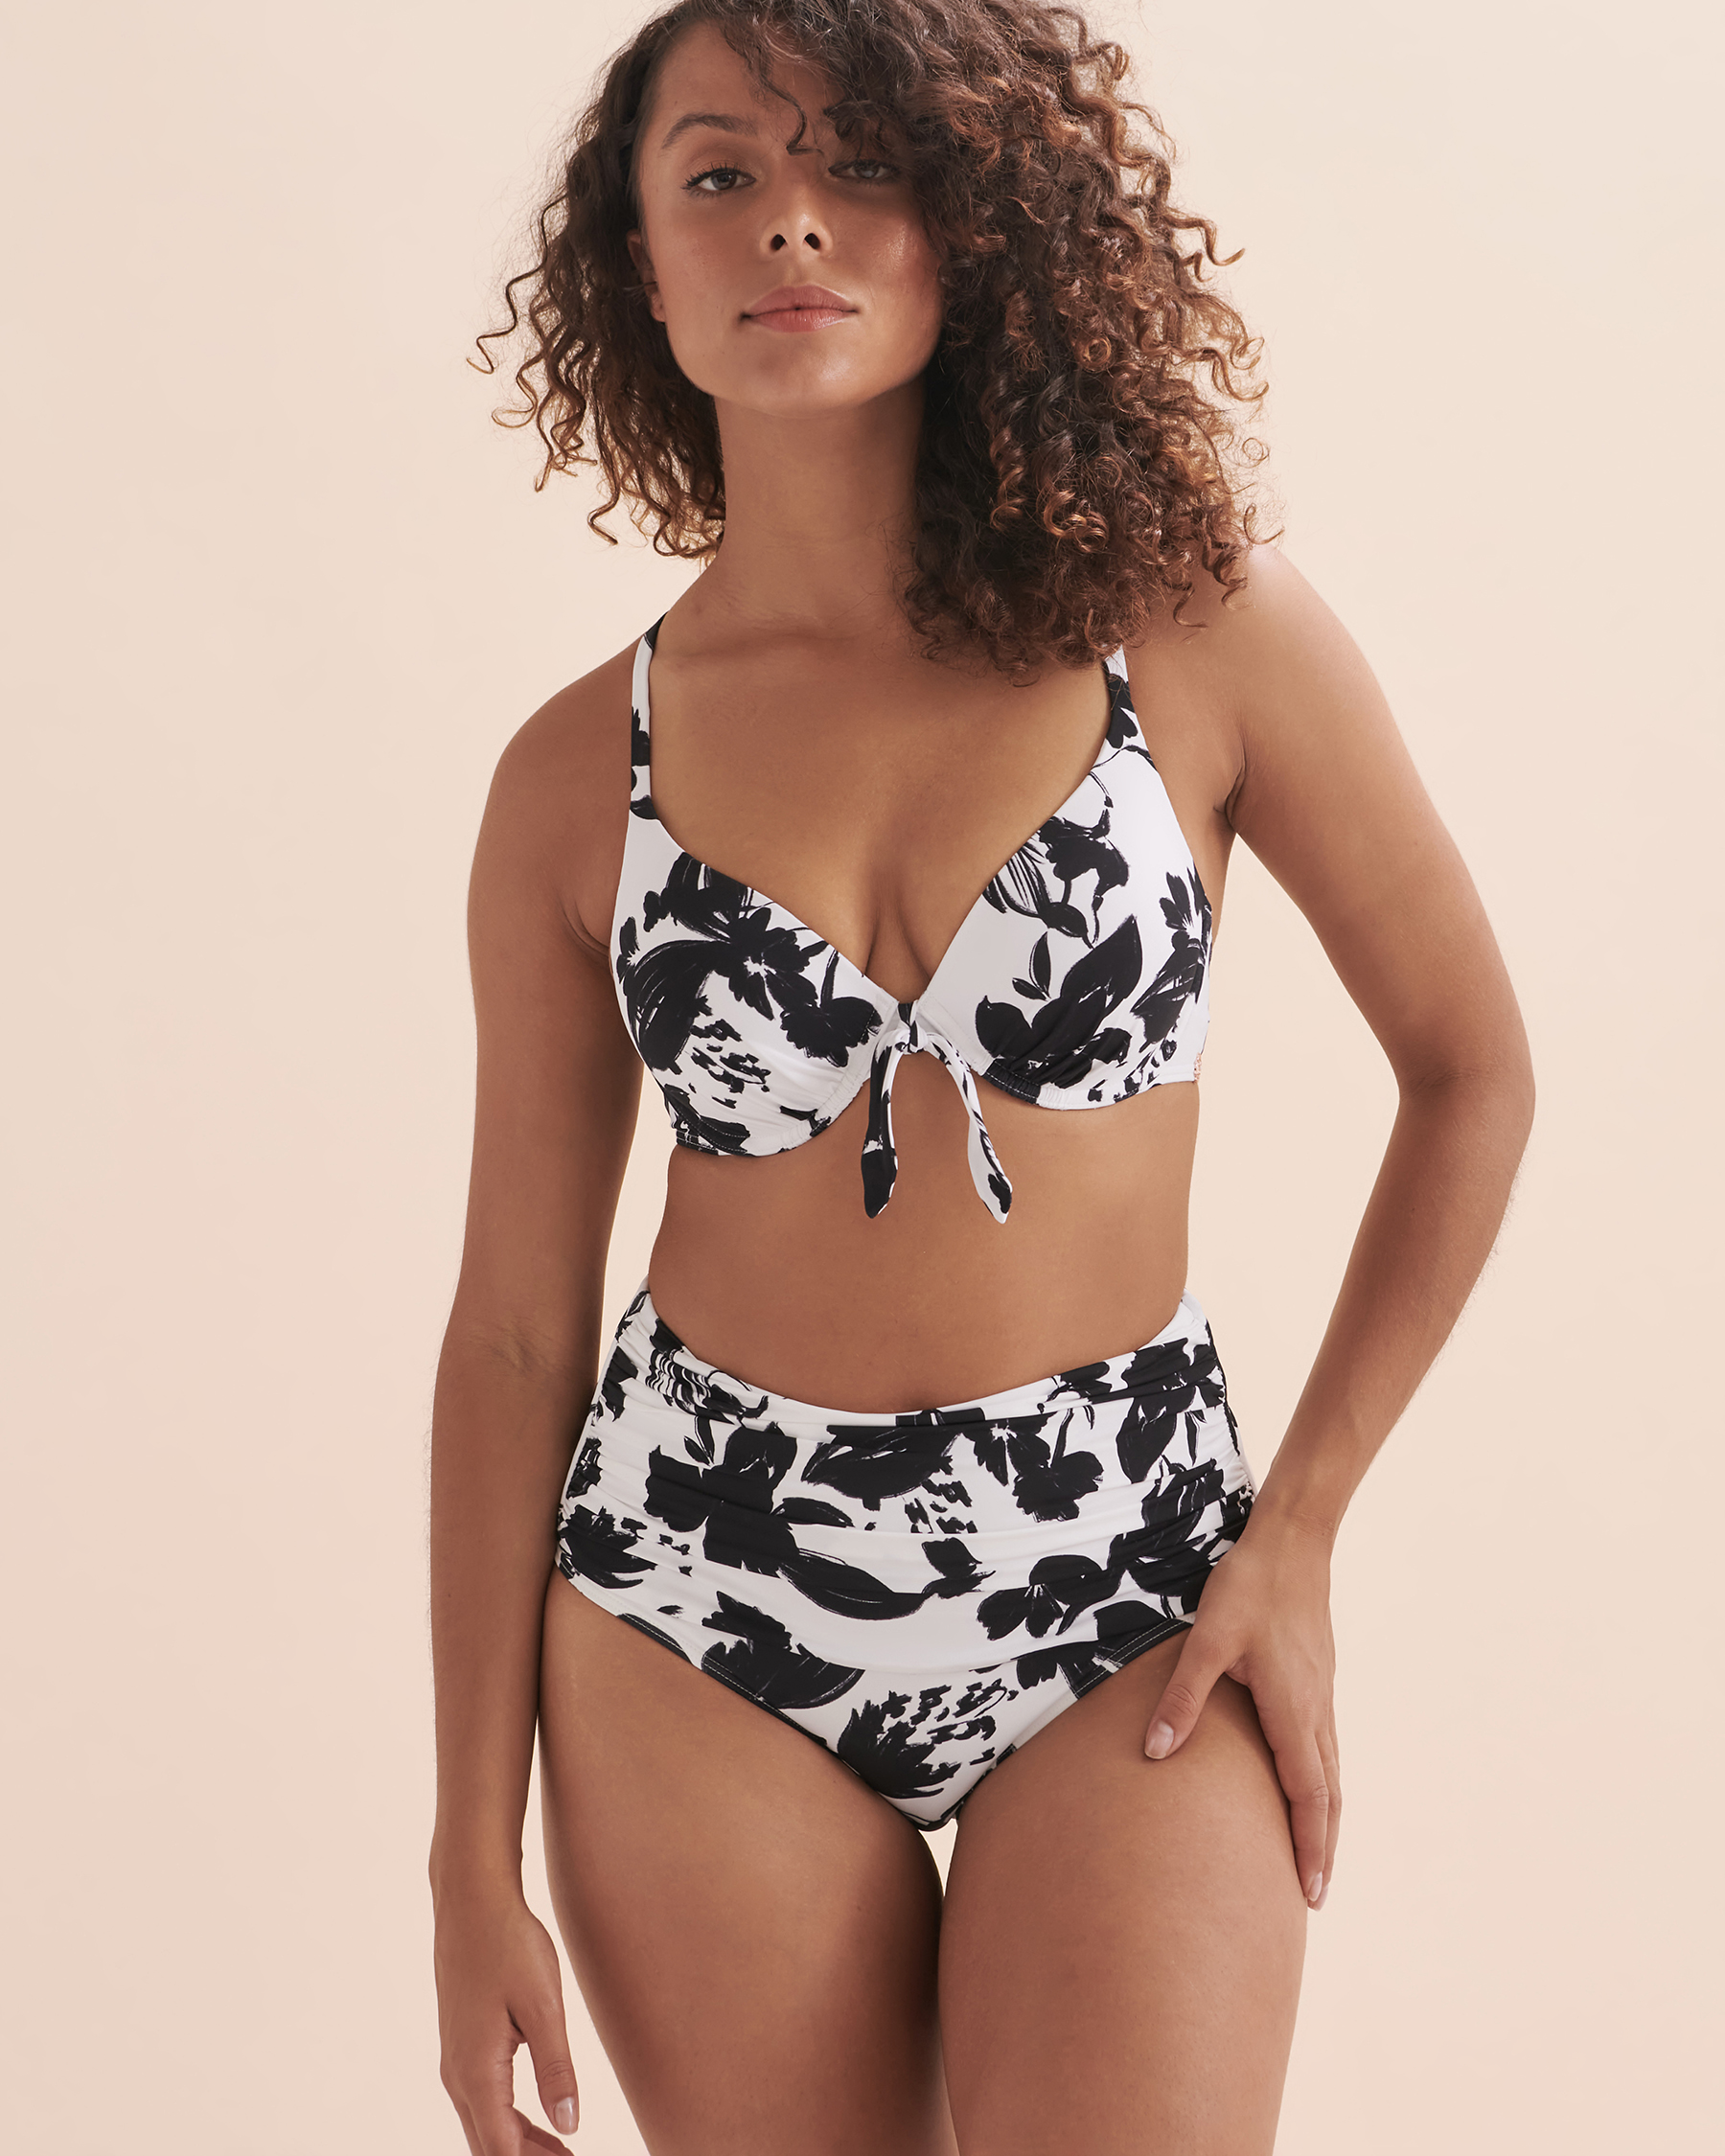 TURQUOISE COUTURE Black & White Abstract Push-up Plunge Bikini Top Black & white floral 01100221 - View3